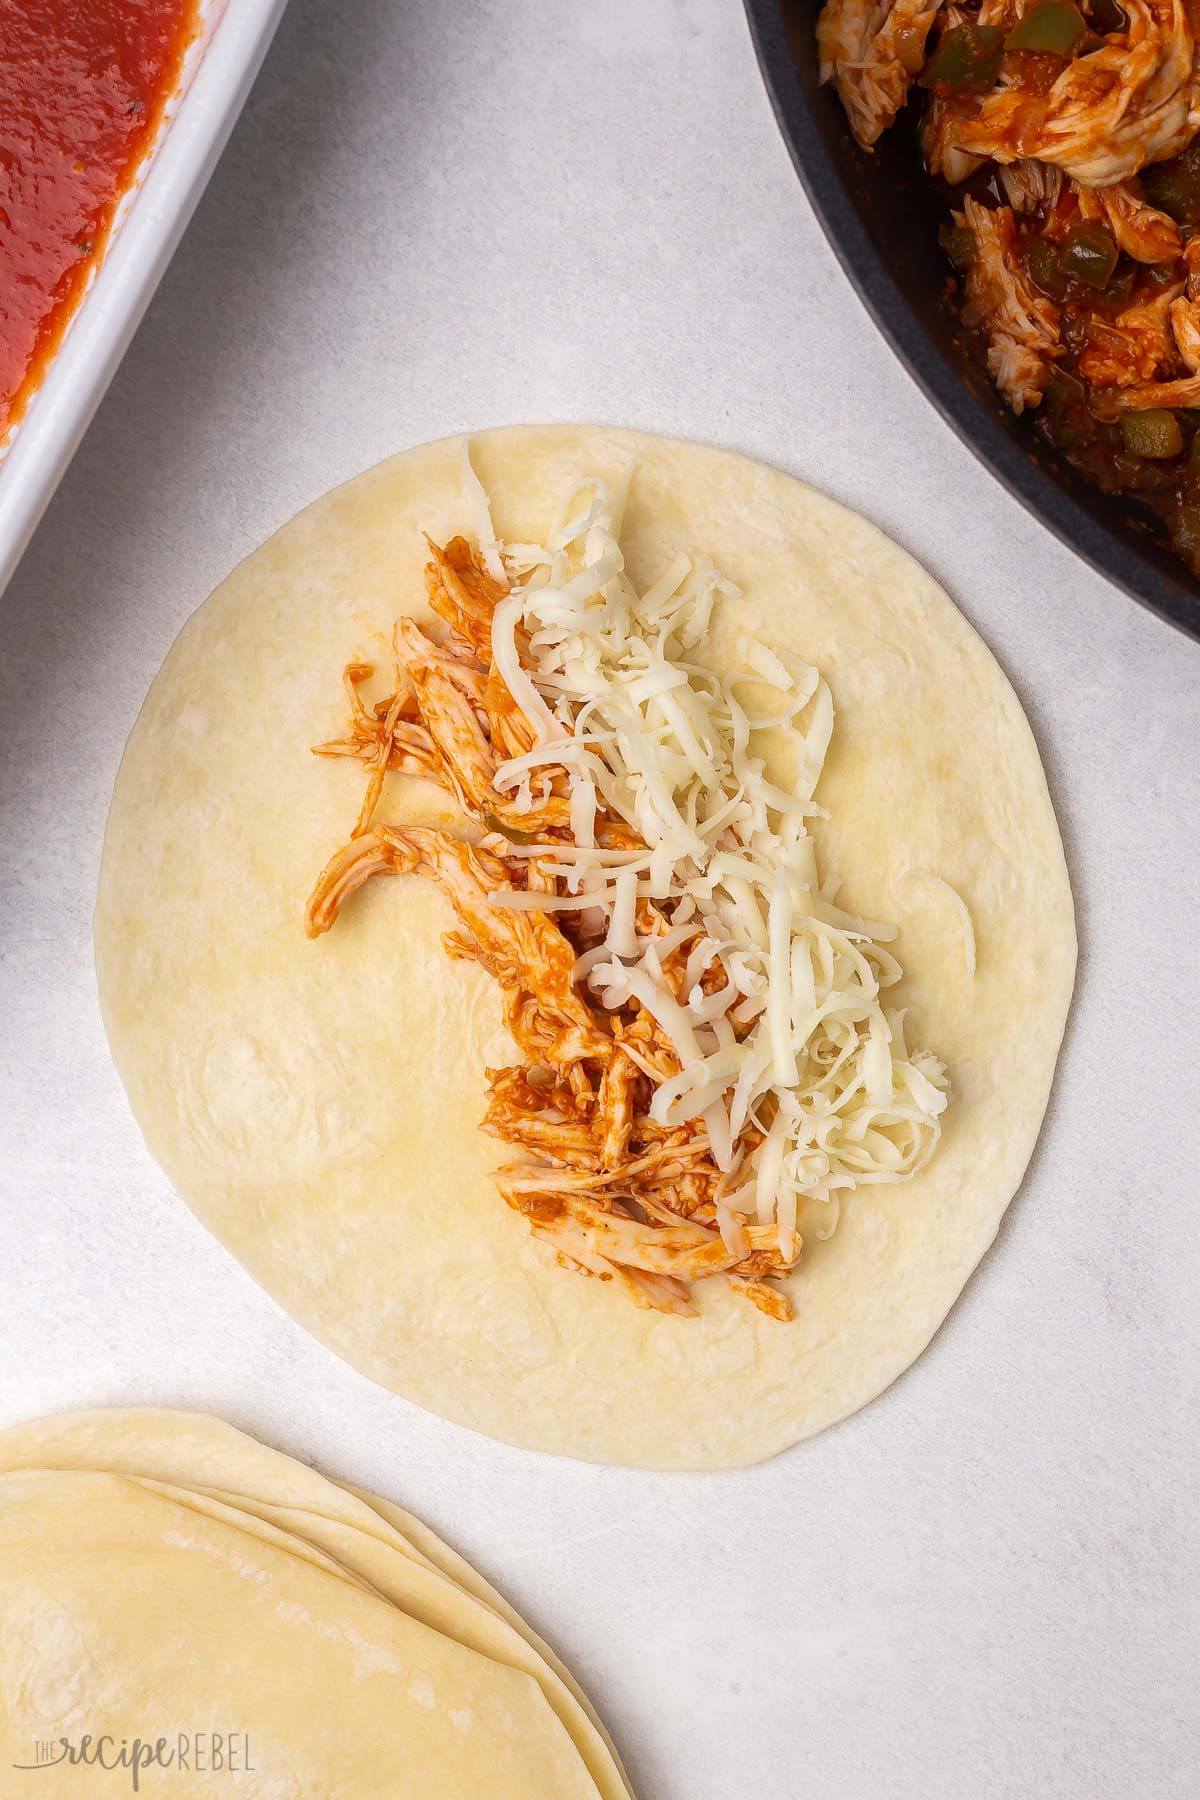 tortilla with shredded chicken and mozzarella lying on a grey surface.